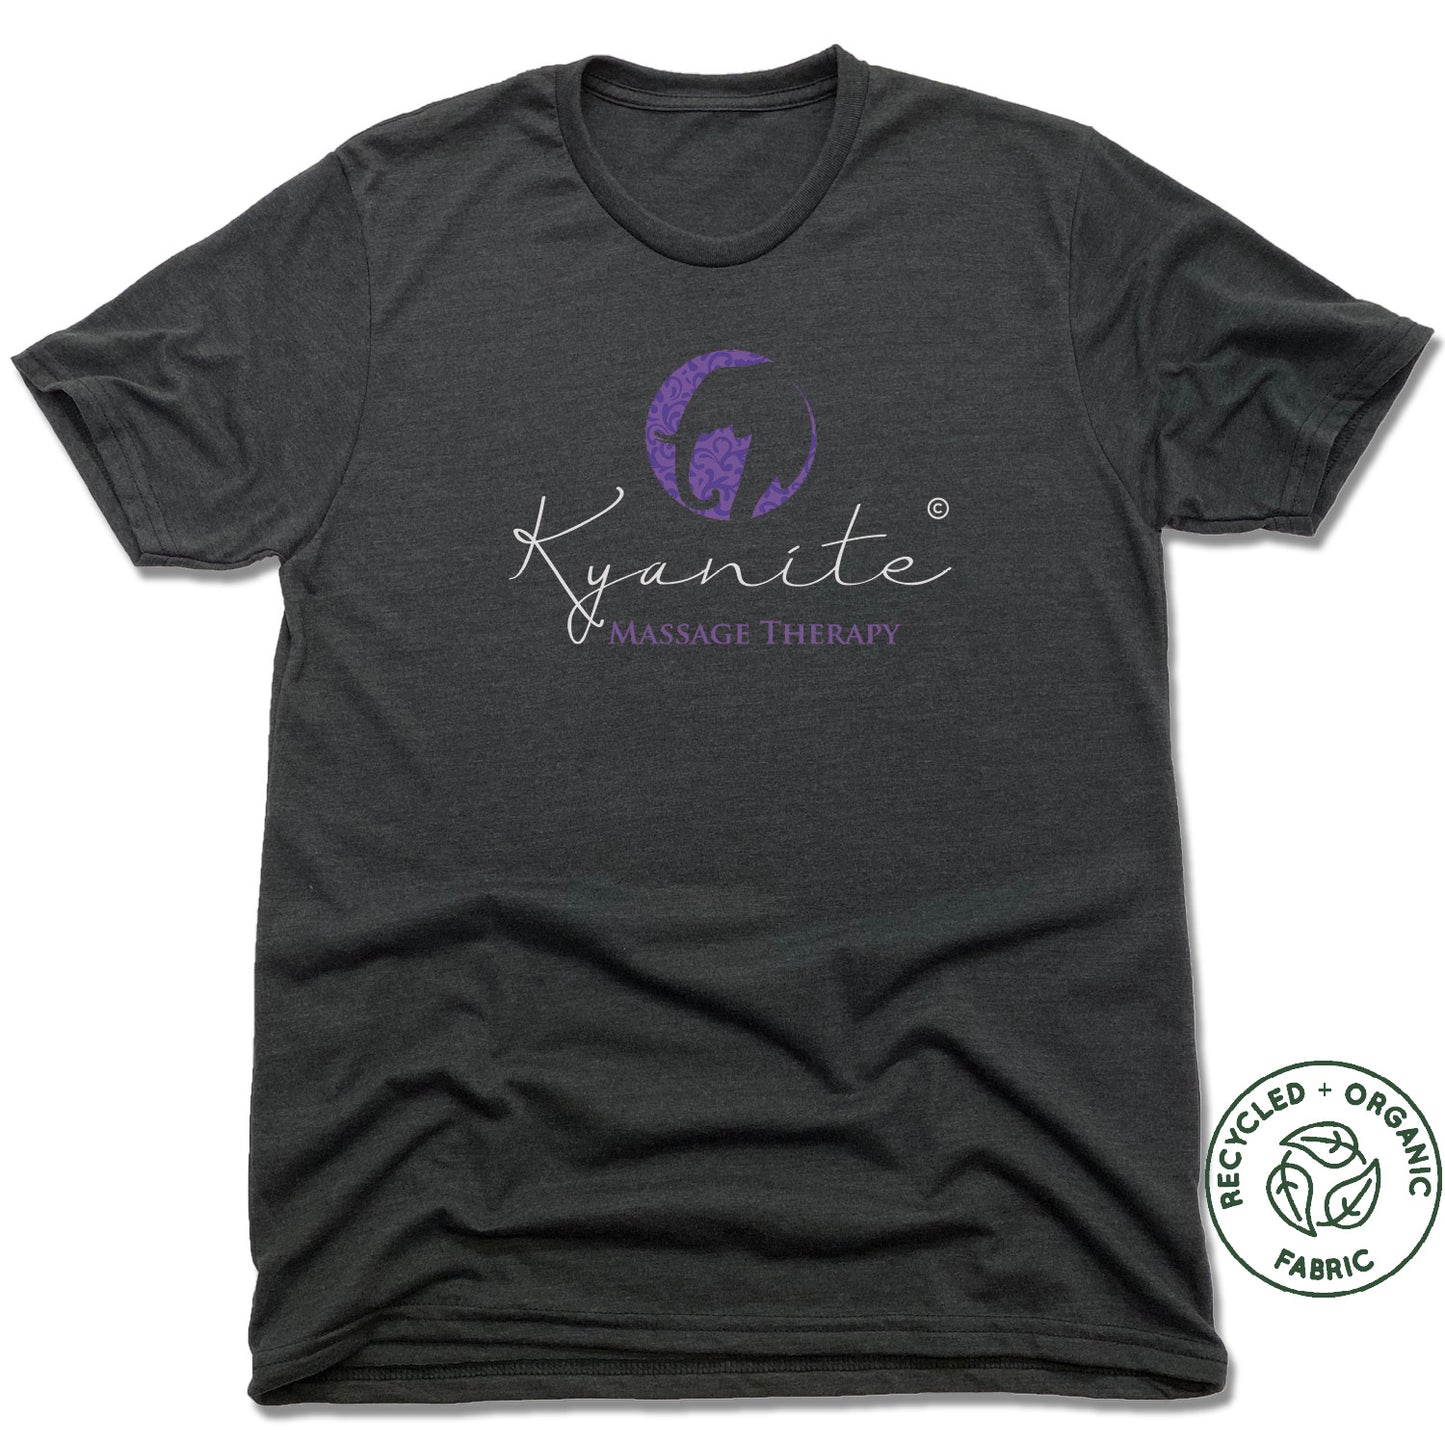 KYANITE MASSAGE THERAPY | UNISEX BLACK Recycled Tri-Blend | COLOR LOGO